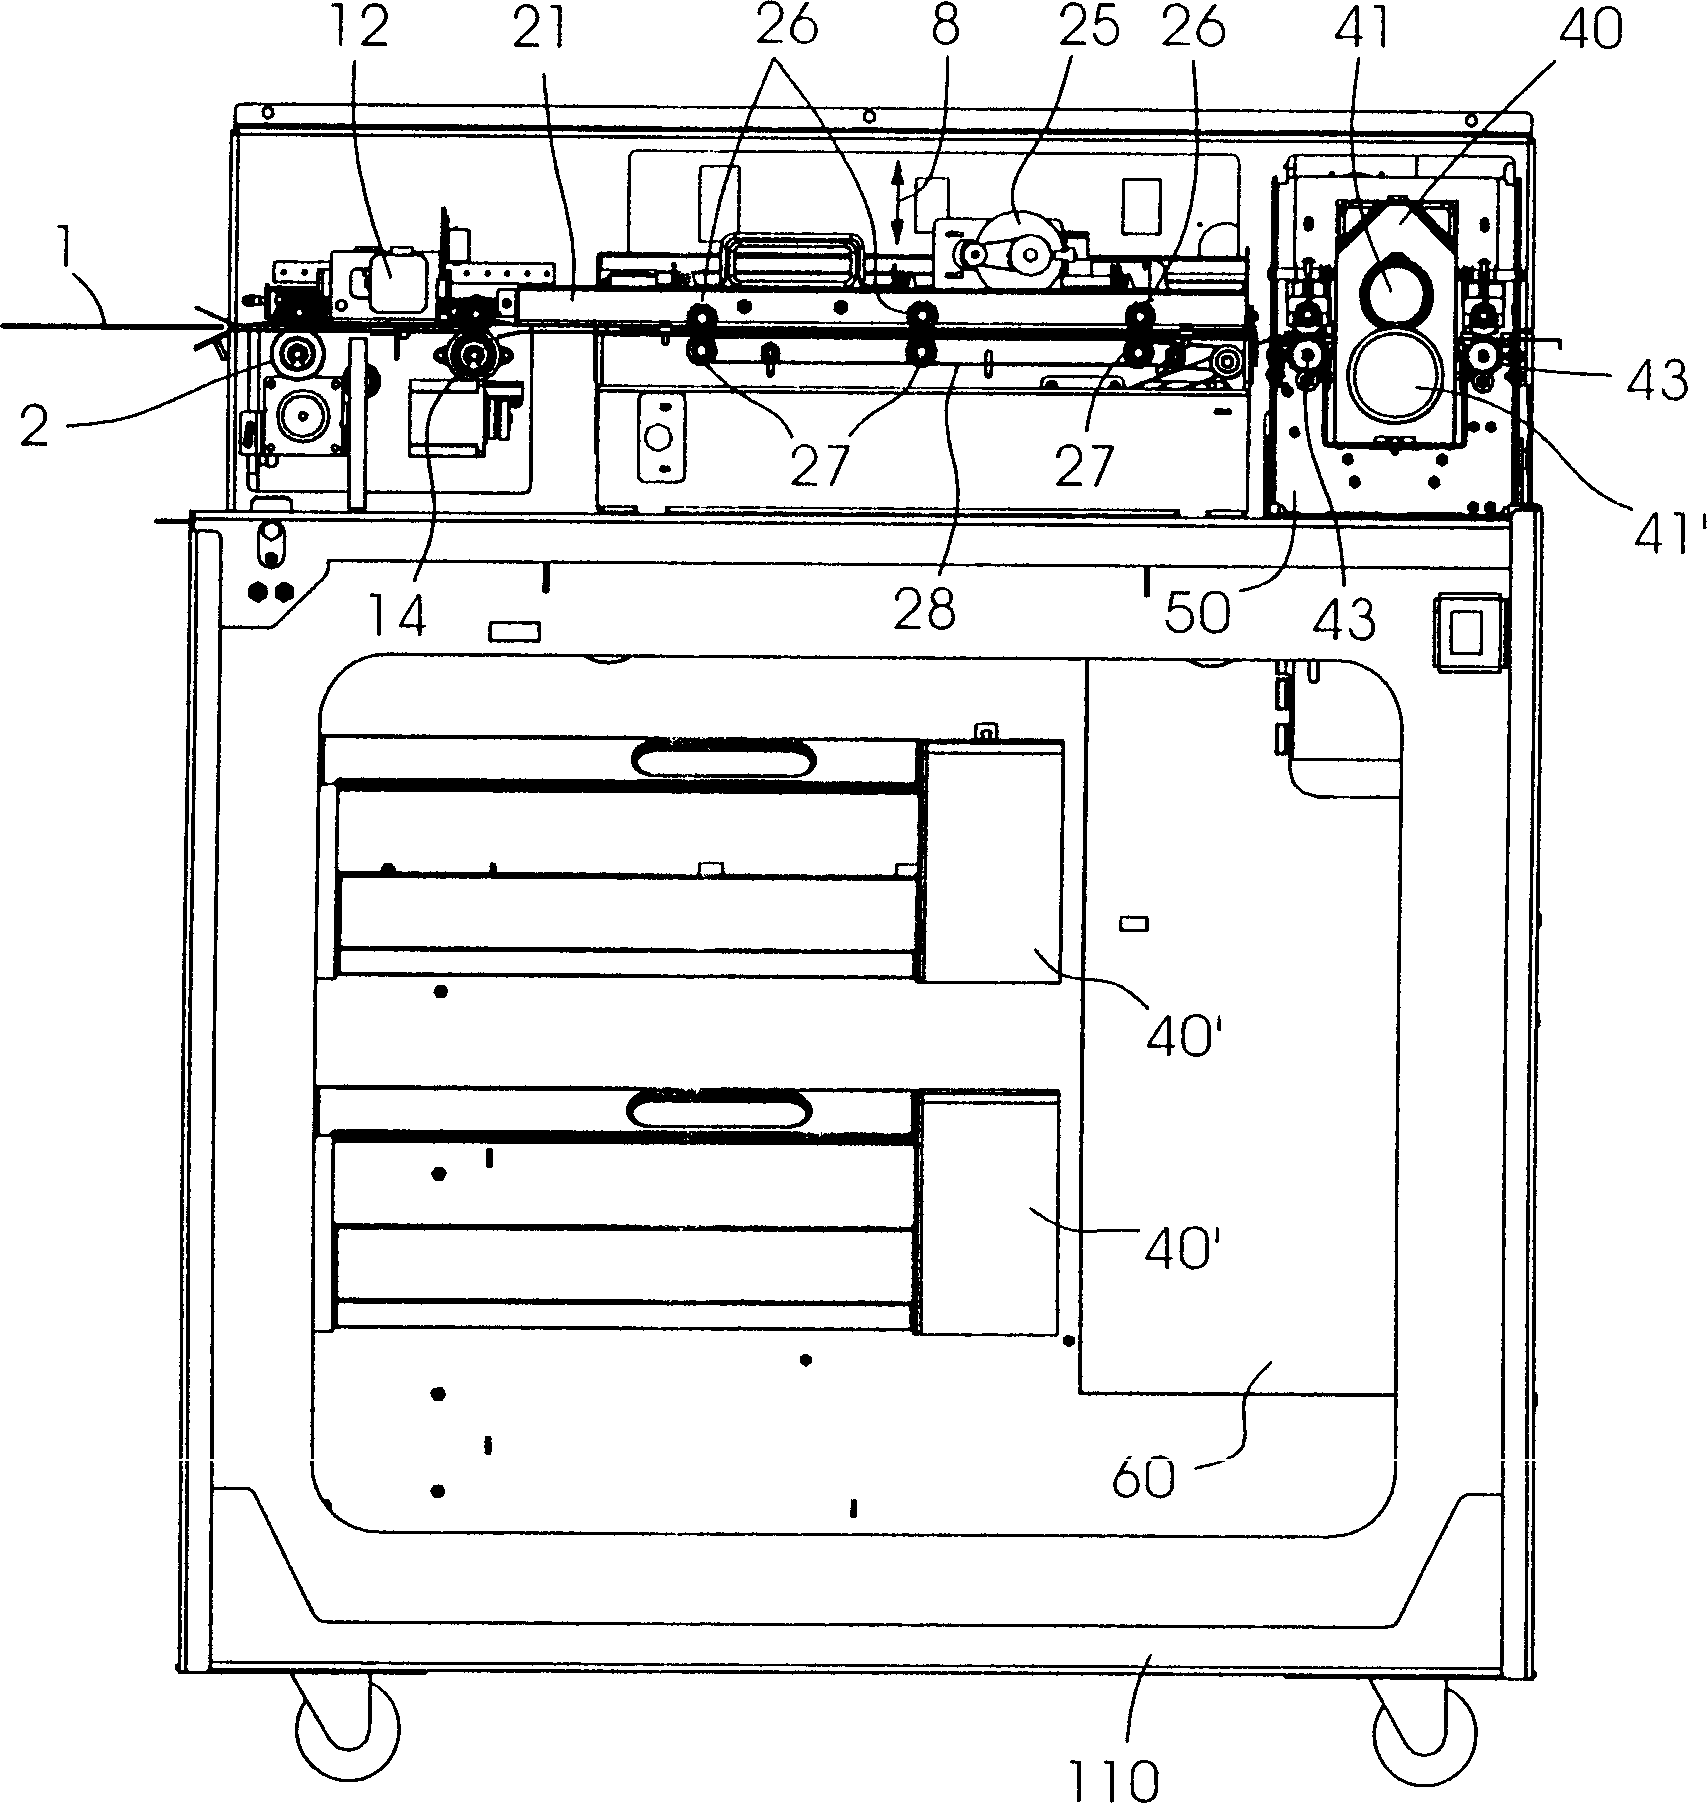 Flowing mechanical treater for page-type printing material